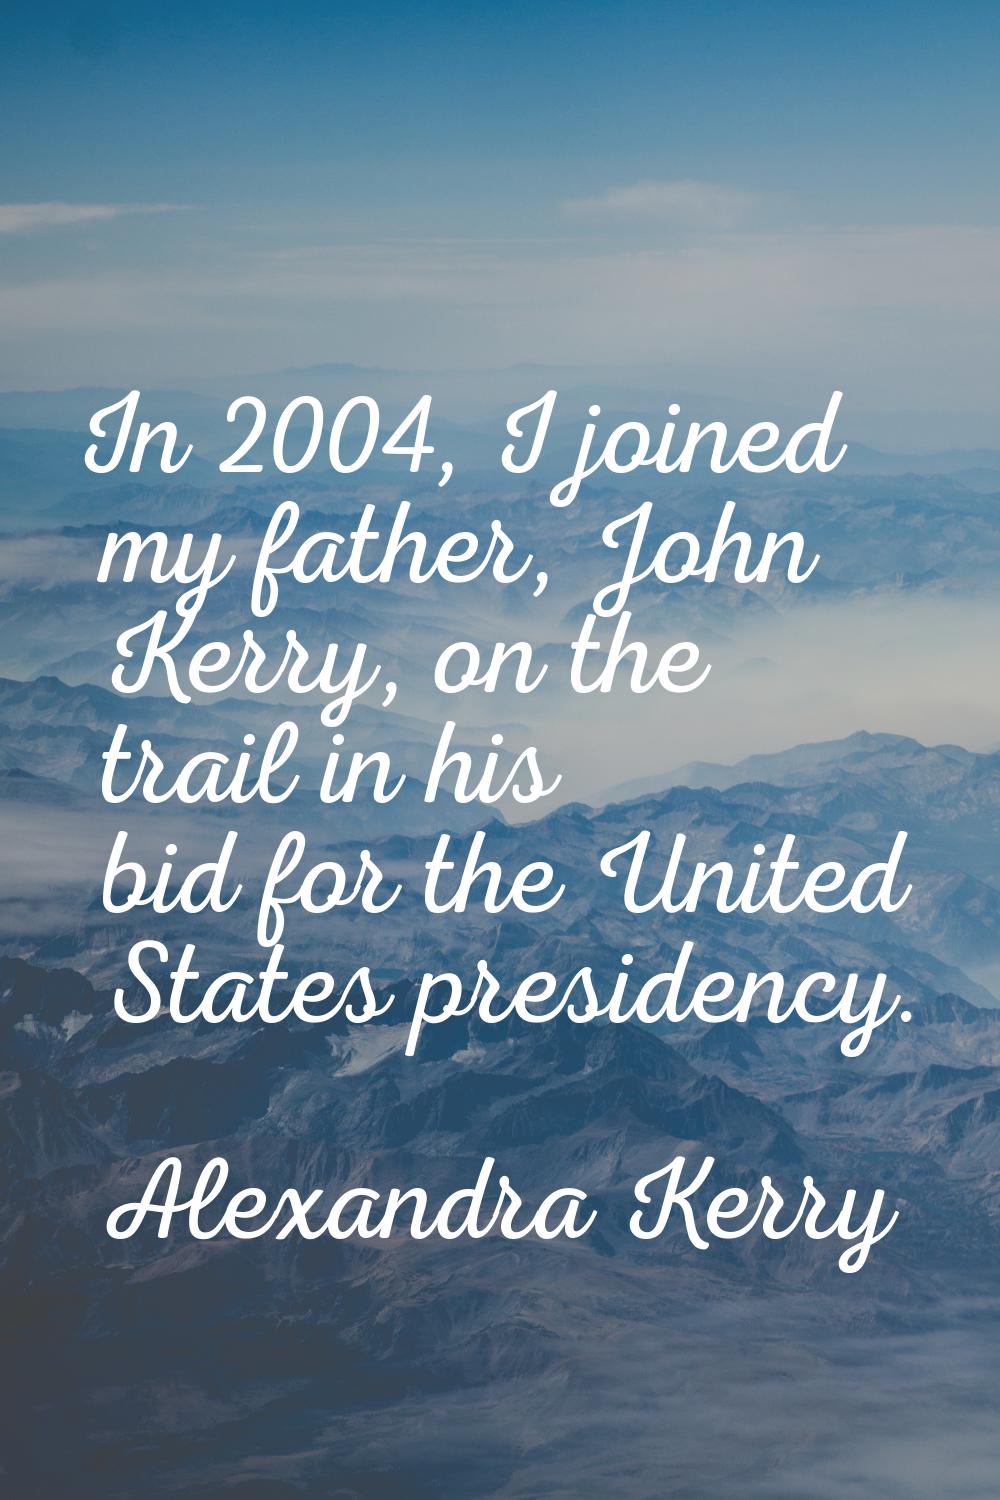 In 2004, I joined my father, John Kerry, on the trail in his bid for the United States presidency.